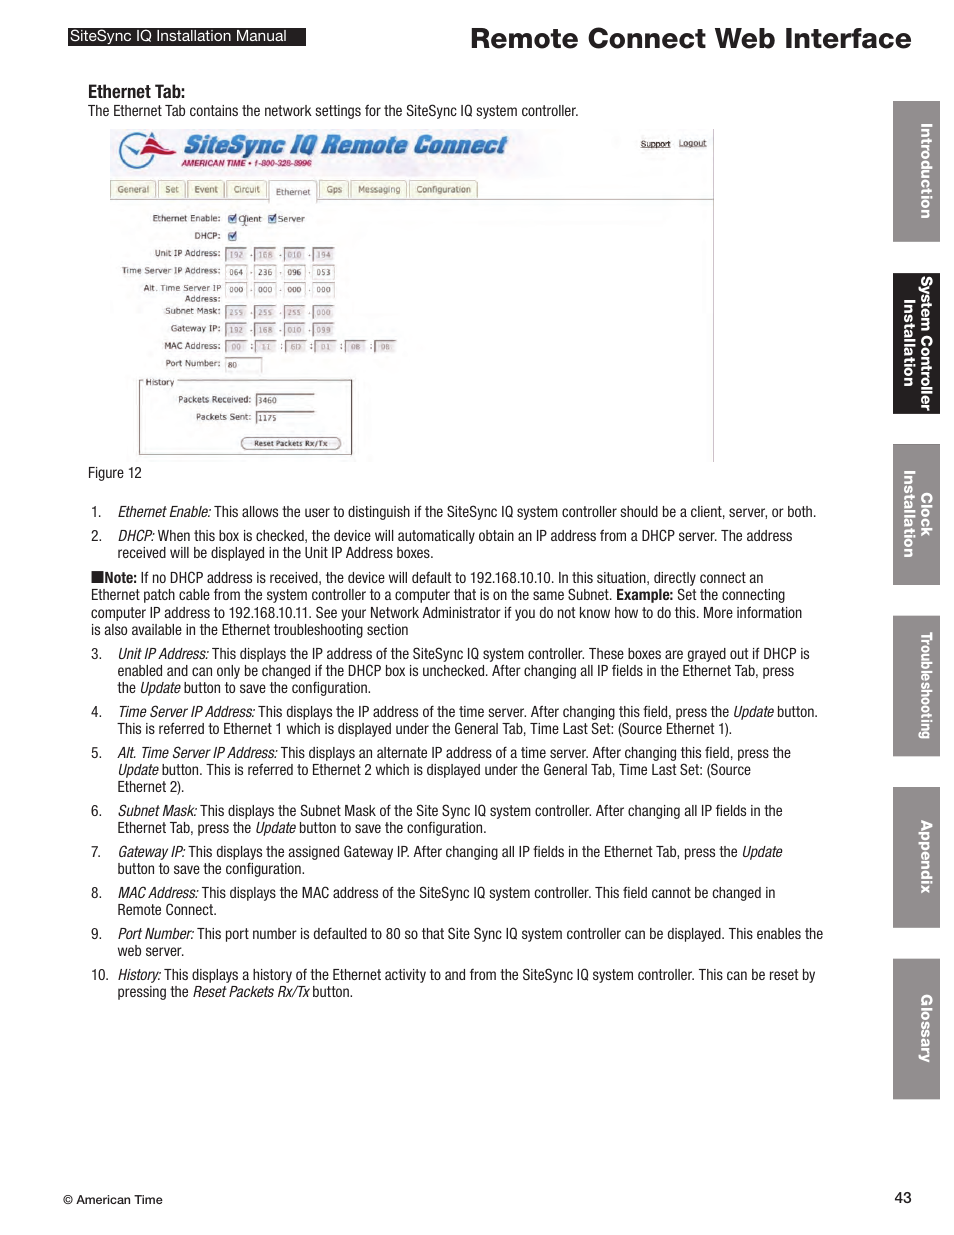 Remote connect web interface | American Time SiteSync IQ User Manual | Page  43 / 81